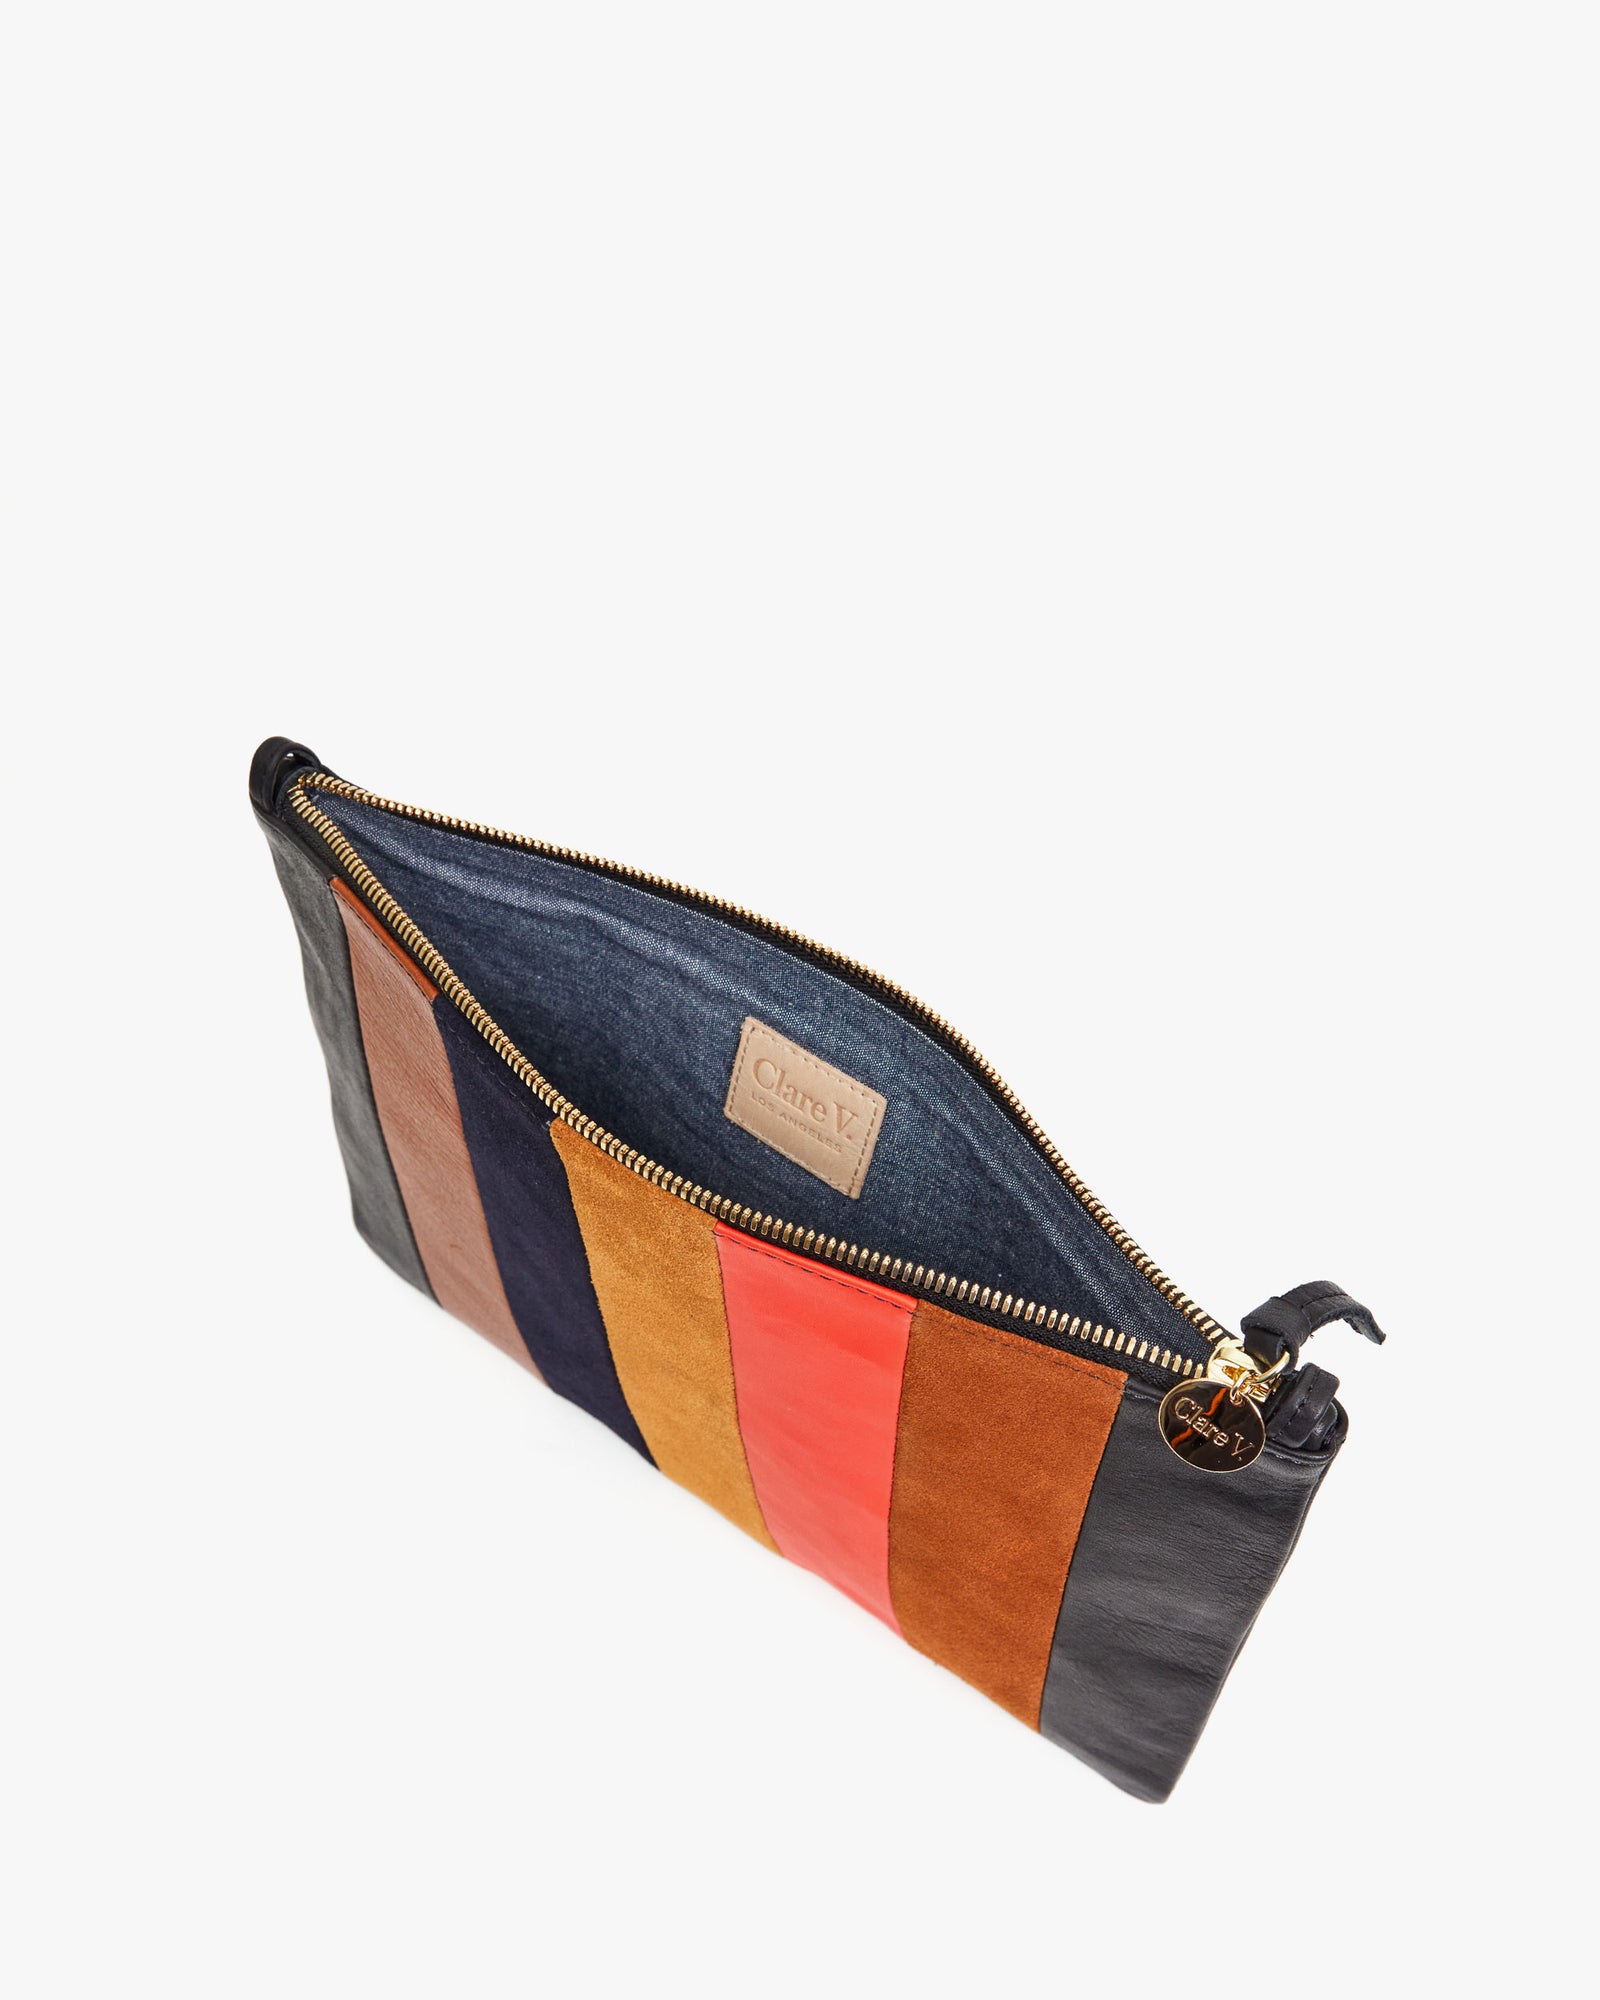 interior image of the Suede / Nappa / Rustic Patchwork Flat Clutch with Tabs